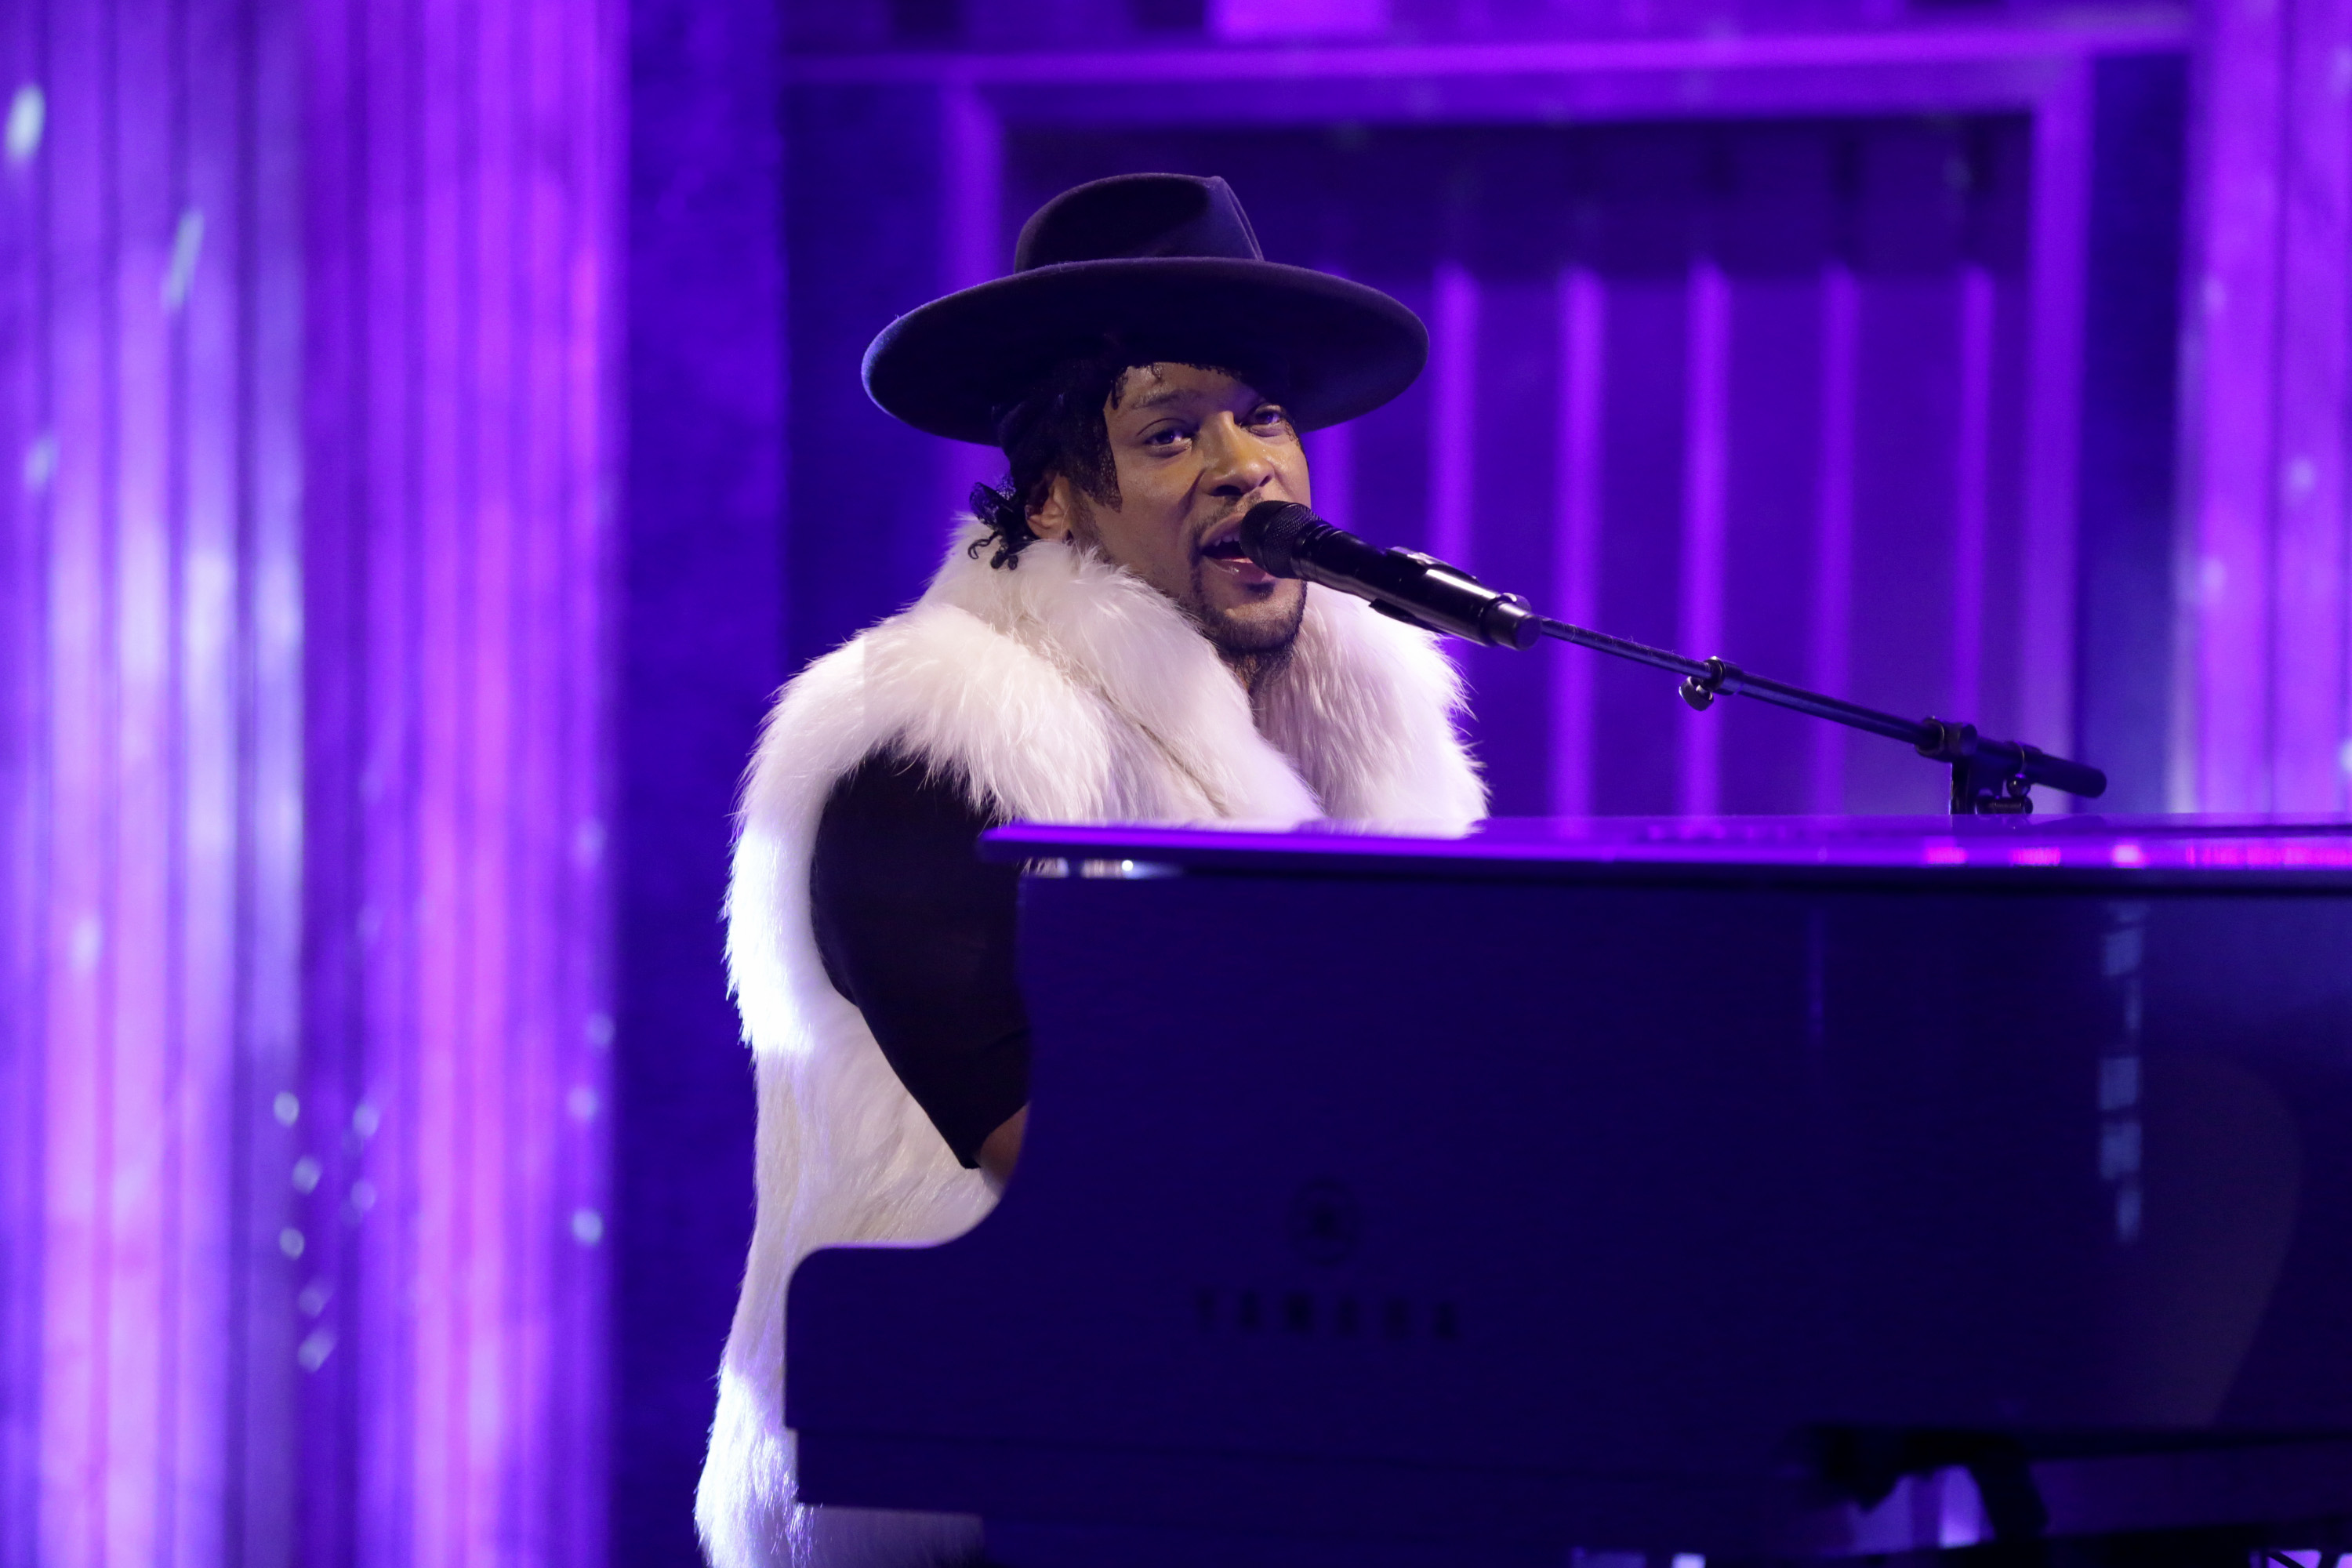 THE TONIGHT SHOW STARRING JIMMY FALLON -- Episode 0458 -- Pictured: Musical guest D'Angelo performs on April 26, 2016 -- (Photo by: Andrew Lipovsky/NBC/NBCU Photo Bank via Getty Images)